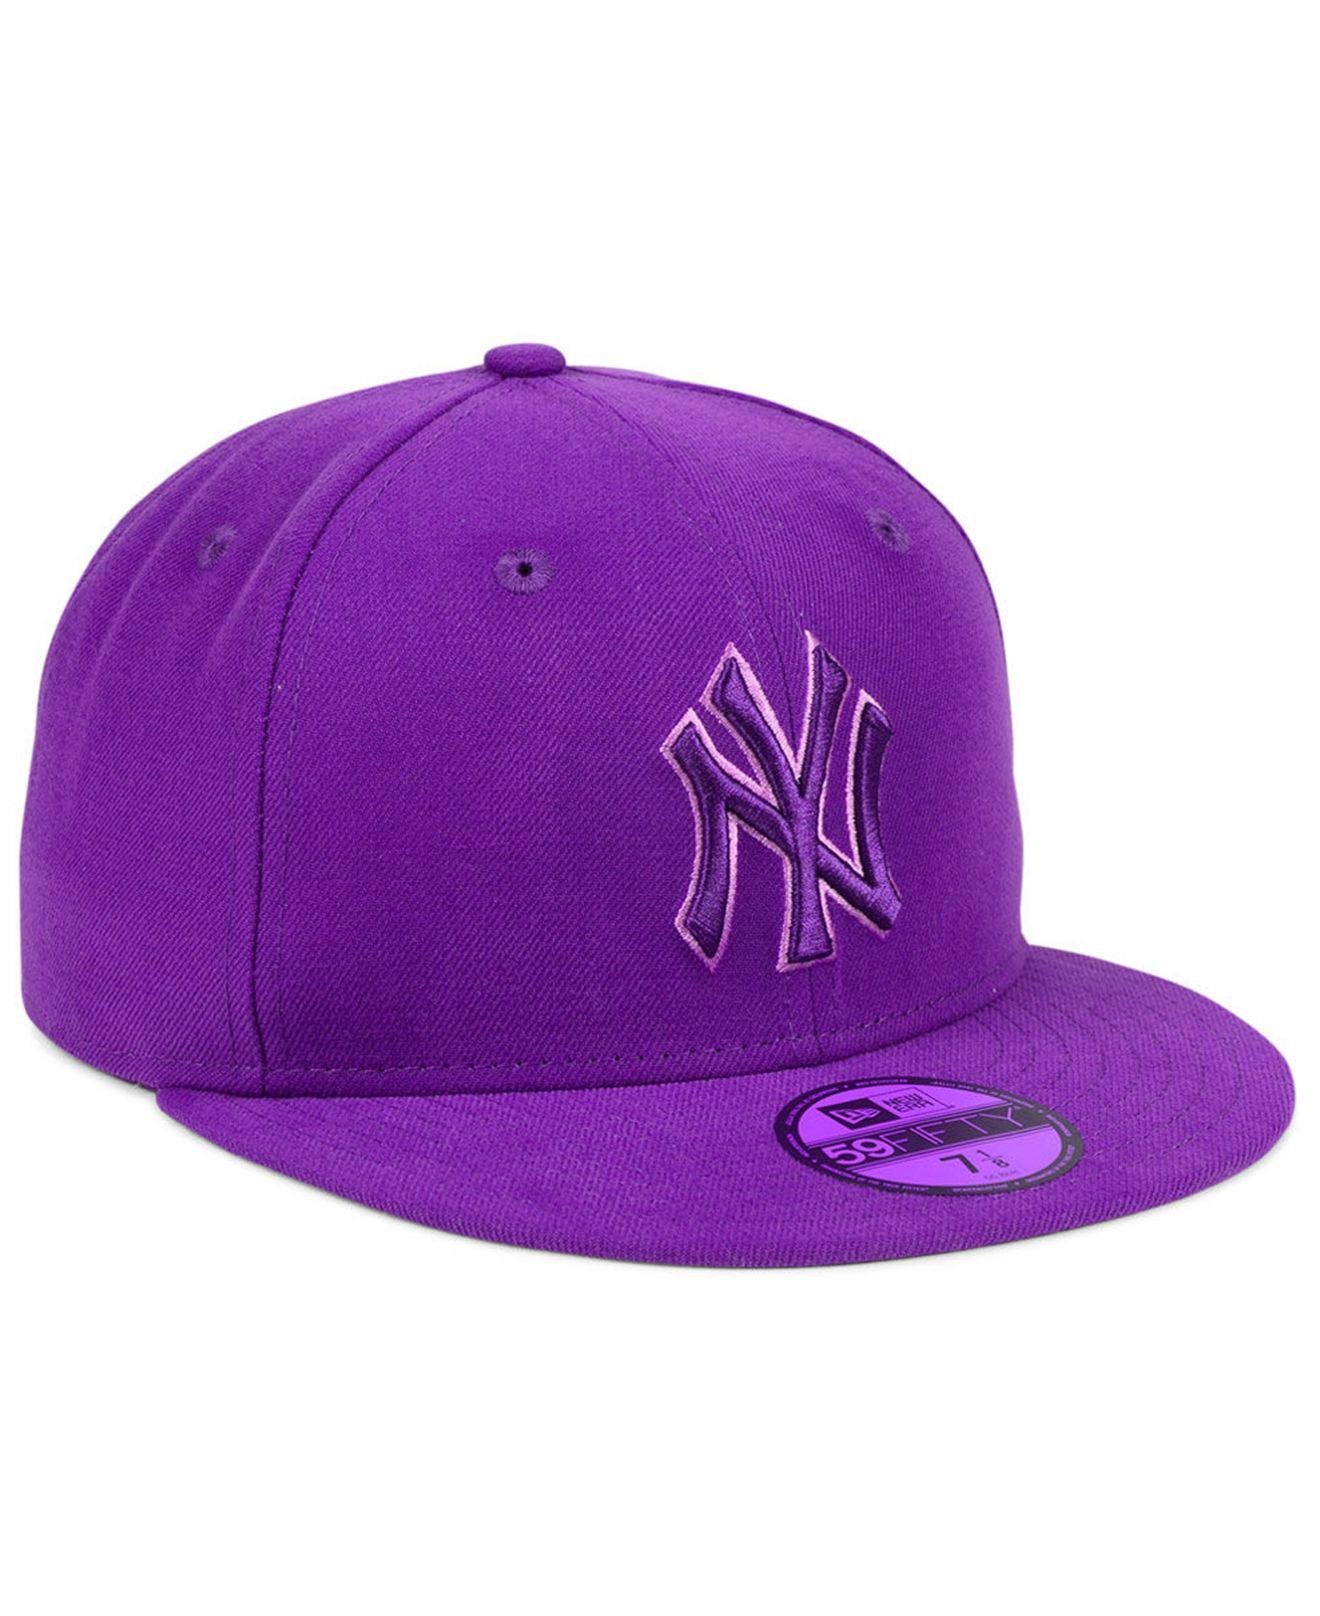 KTZ New York Yankees Prism Color Pack 59fifty Fitted Cap in Purple for Men